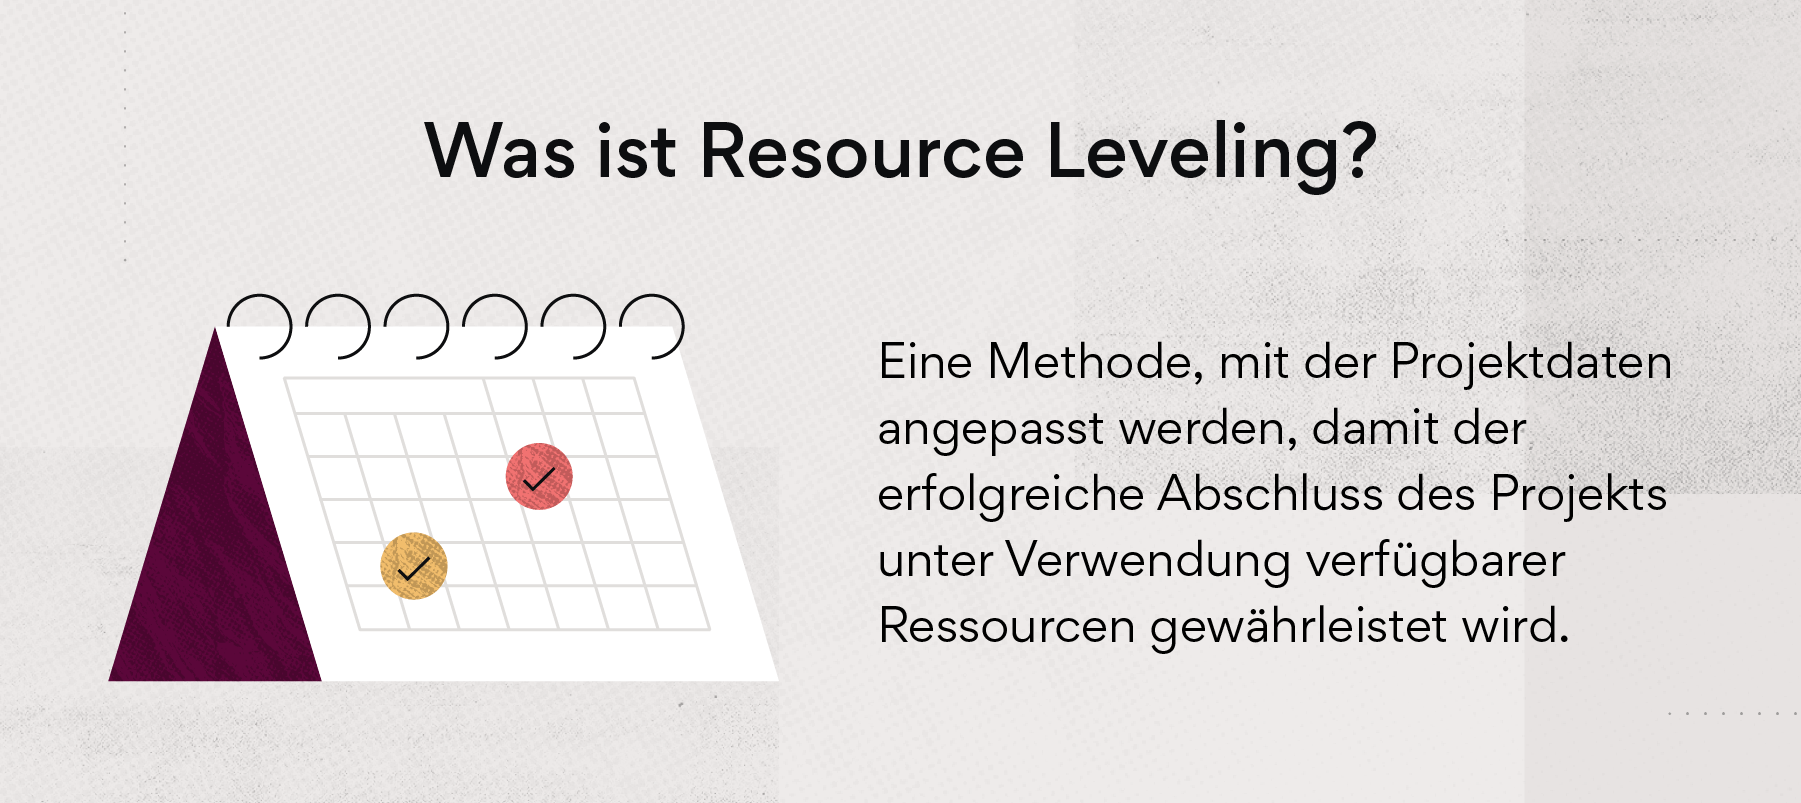 Was ist Resource Leveling?